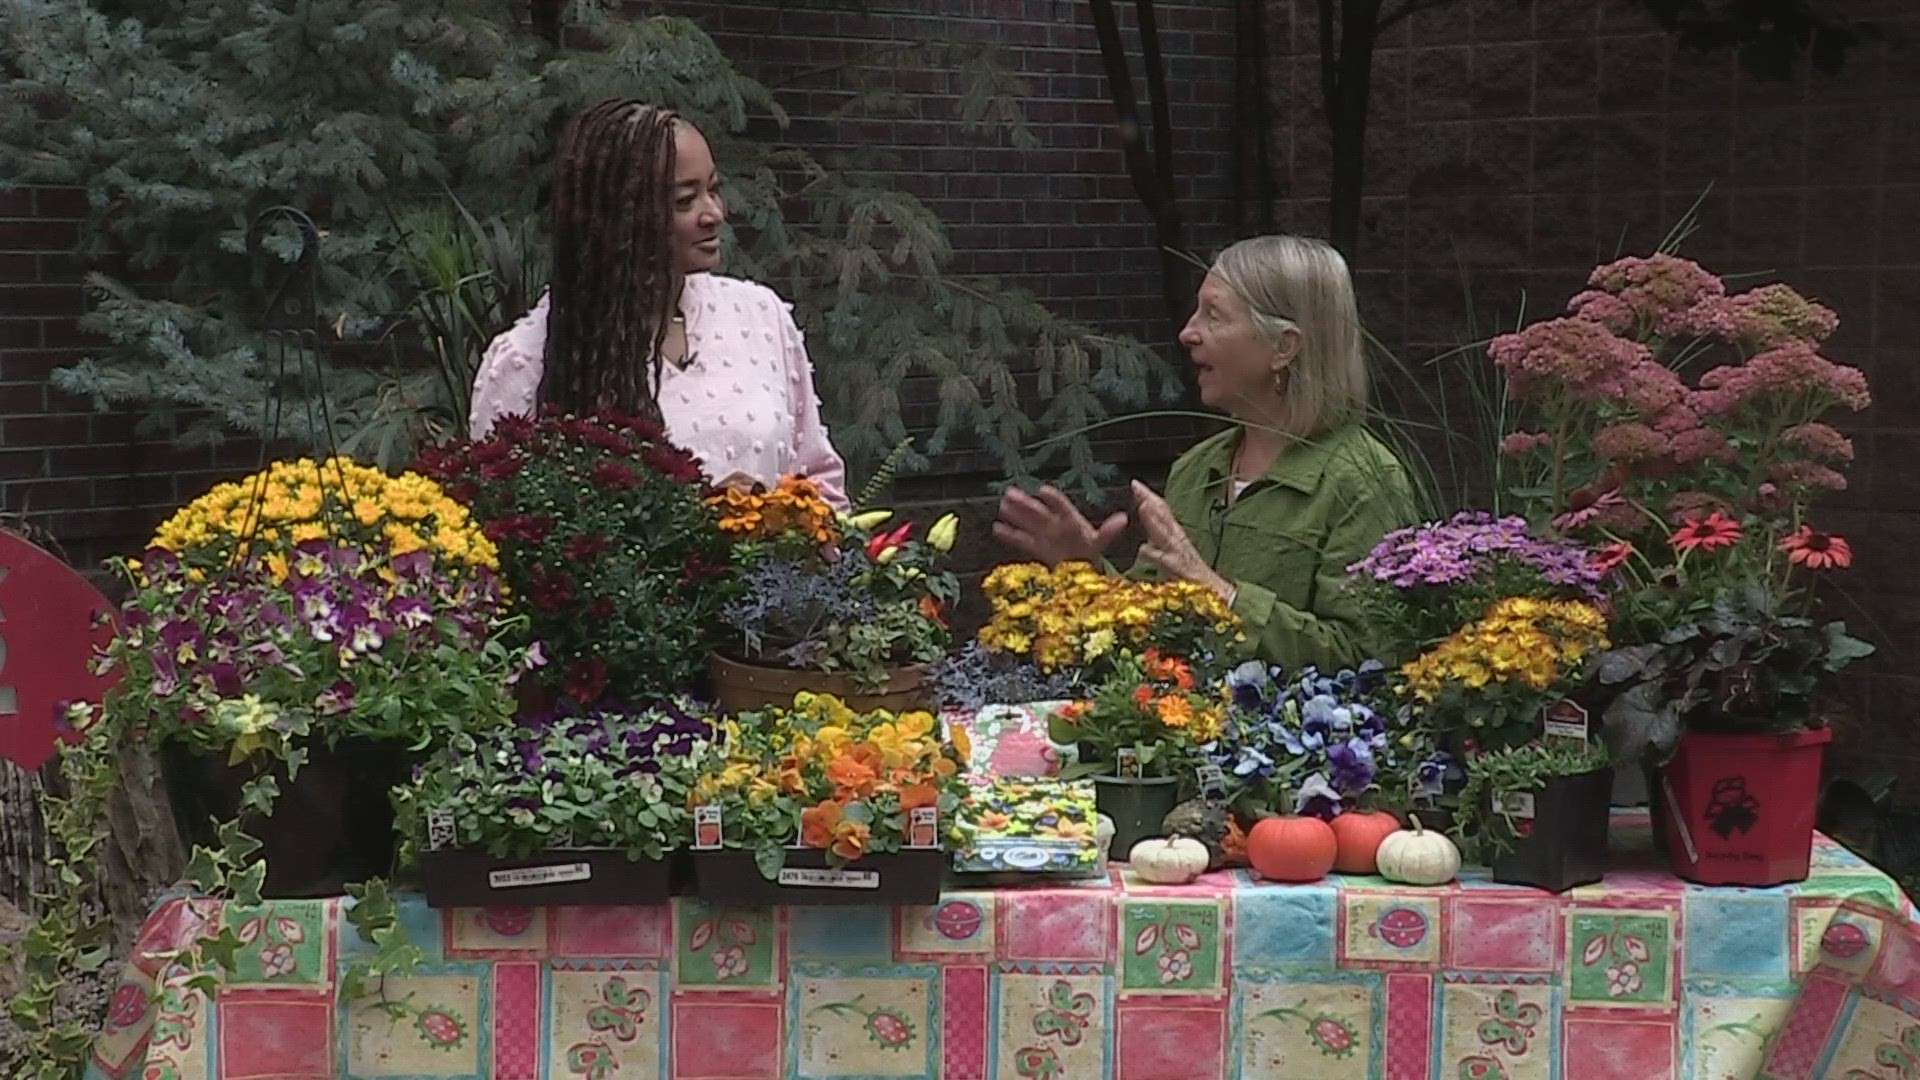 Gardening expert Debi Borden-Miller gives tips on how to take care on your plants as seasons start to change.